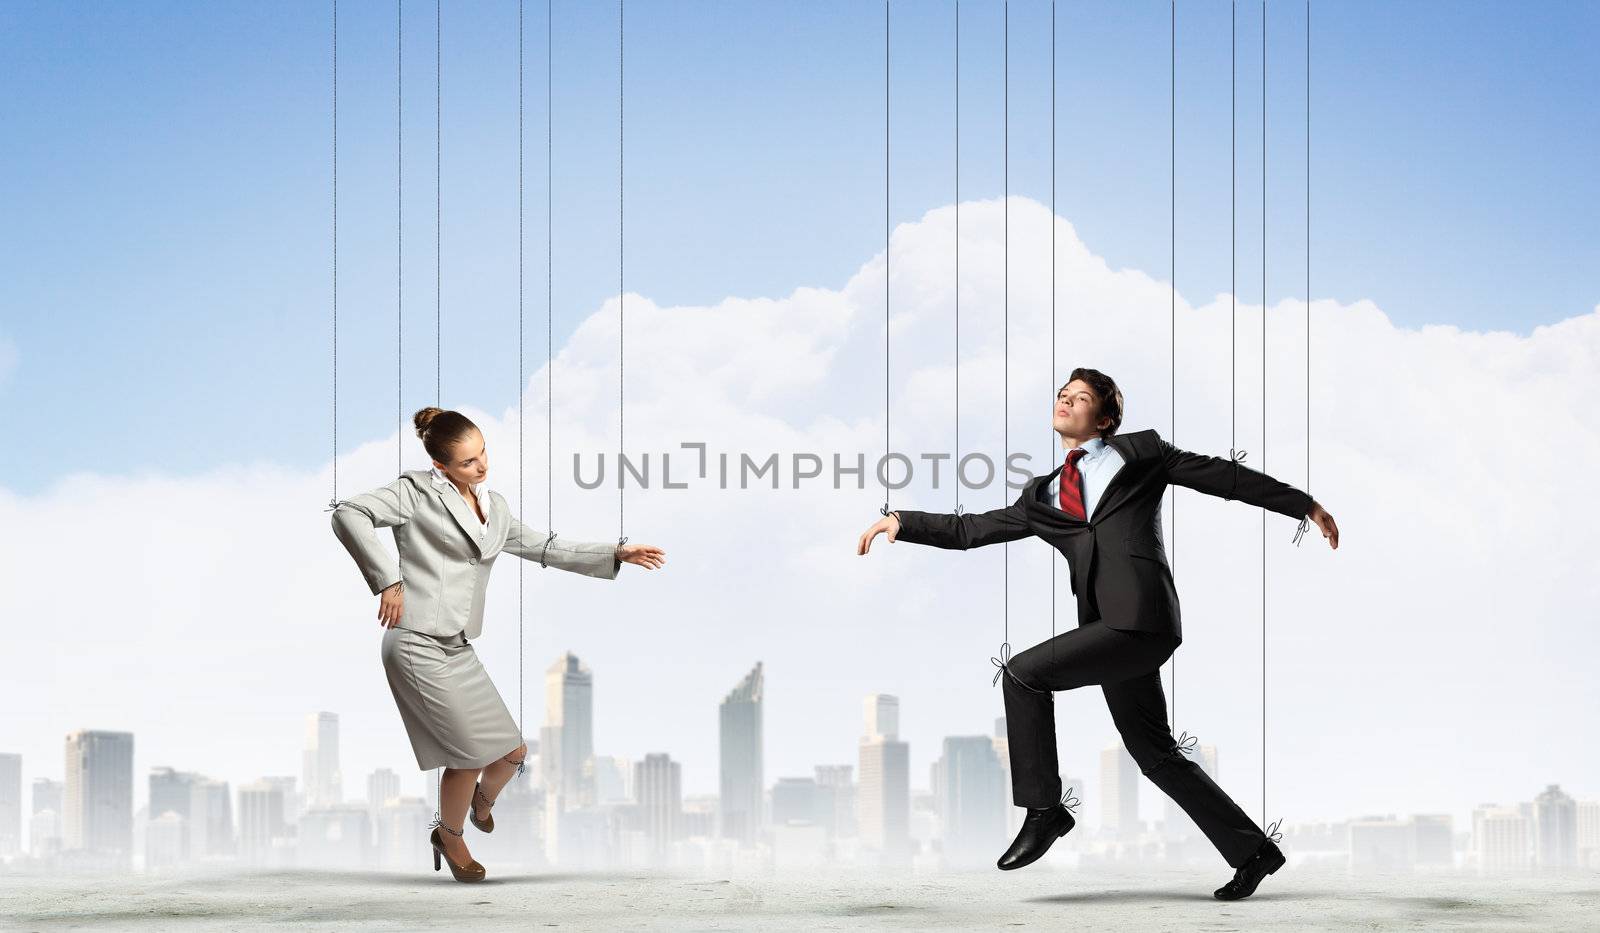 Image of businesspeople hanging on strings like marionettes against city background. Conceptual photography